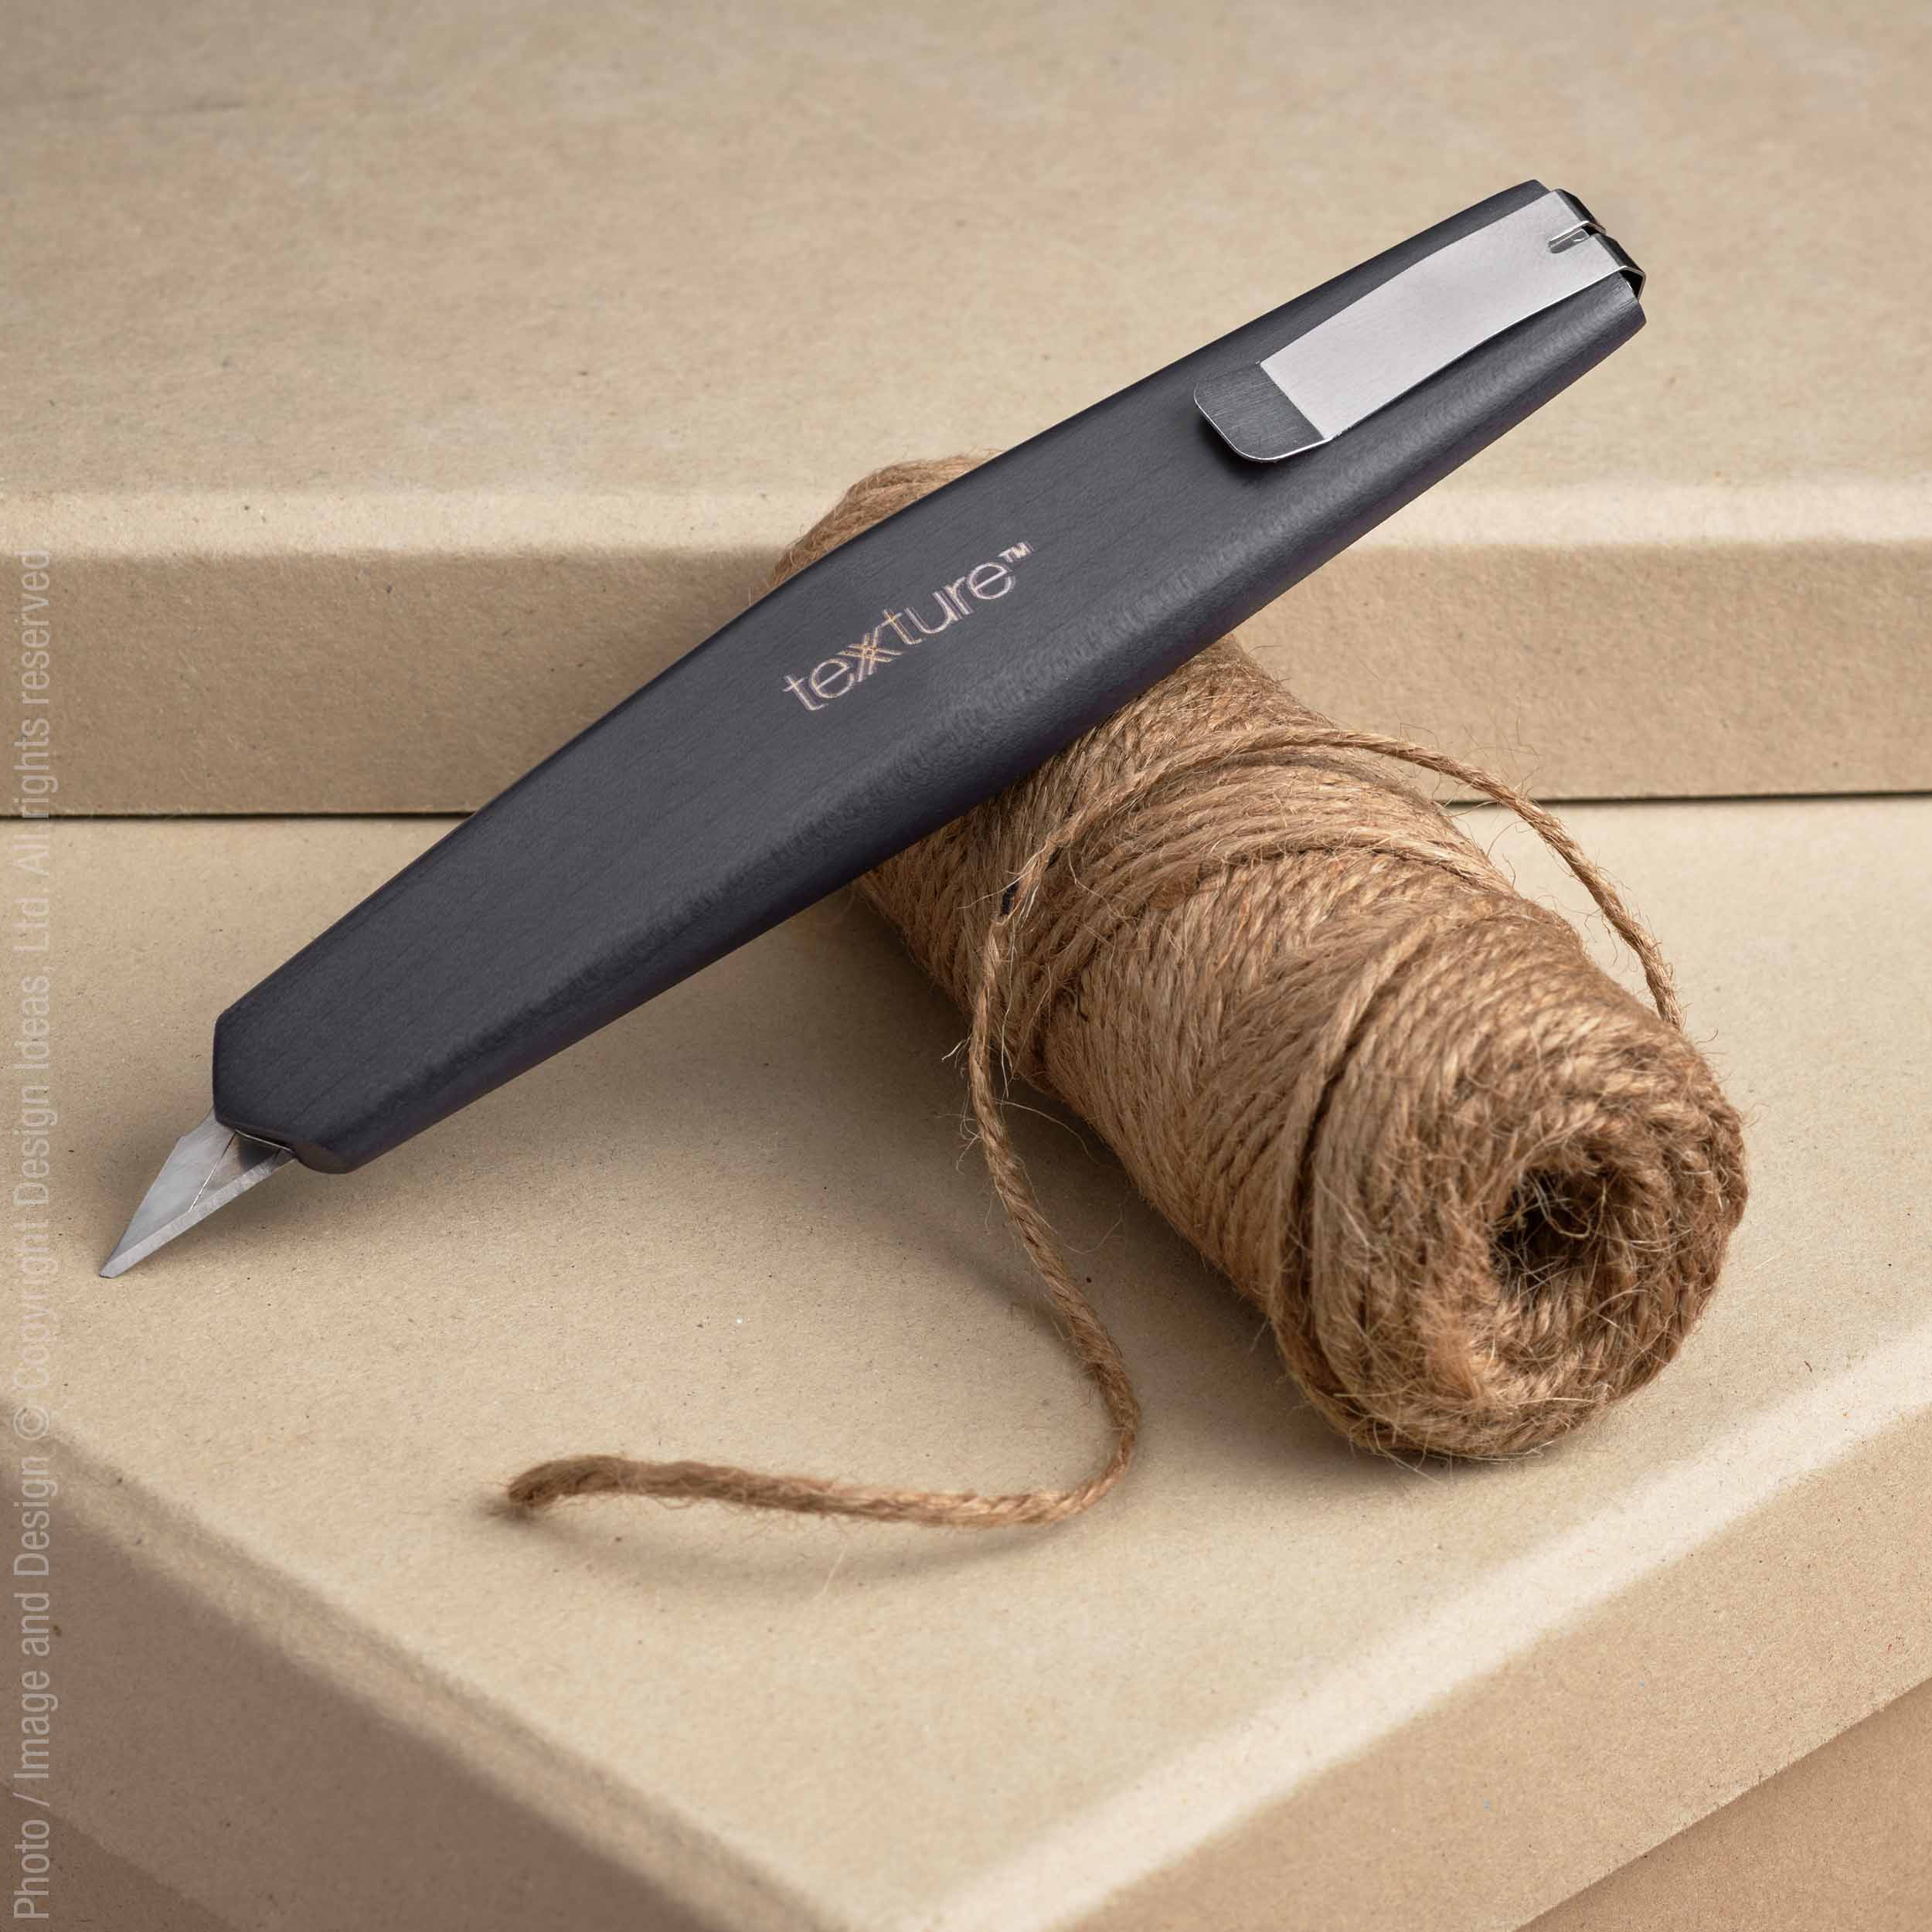 Cokala™ utility knife - Black | Image 1 | Premium Desk Accessory from the Cokala collection | made with Sycamore for long lasting use | texxture